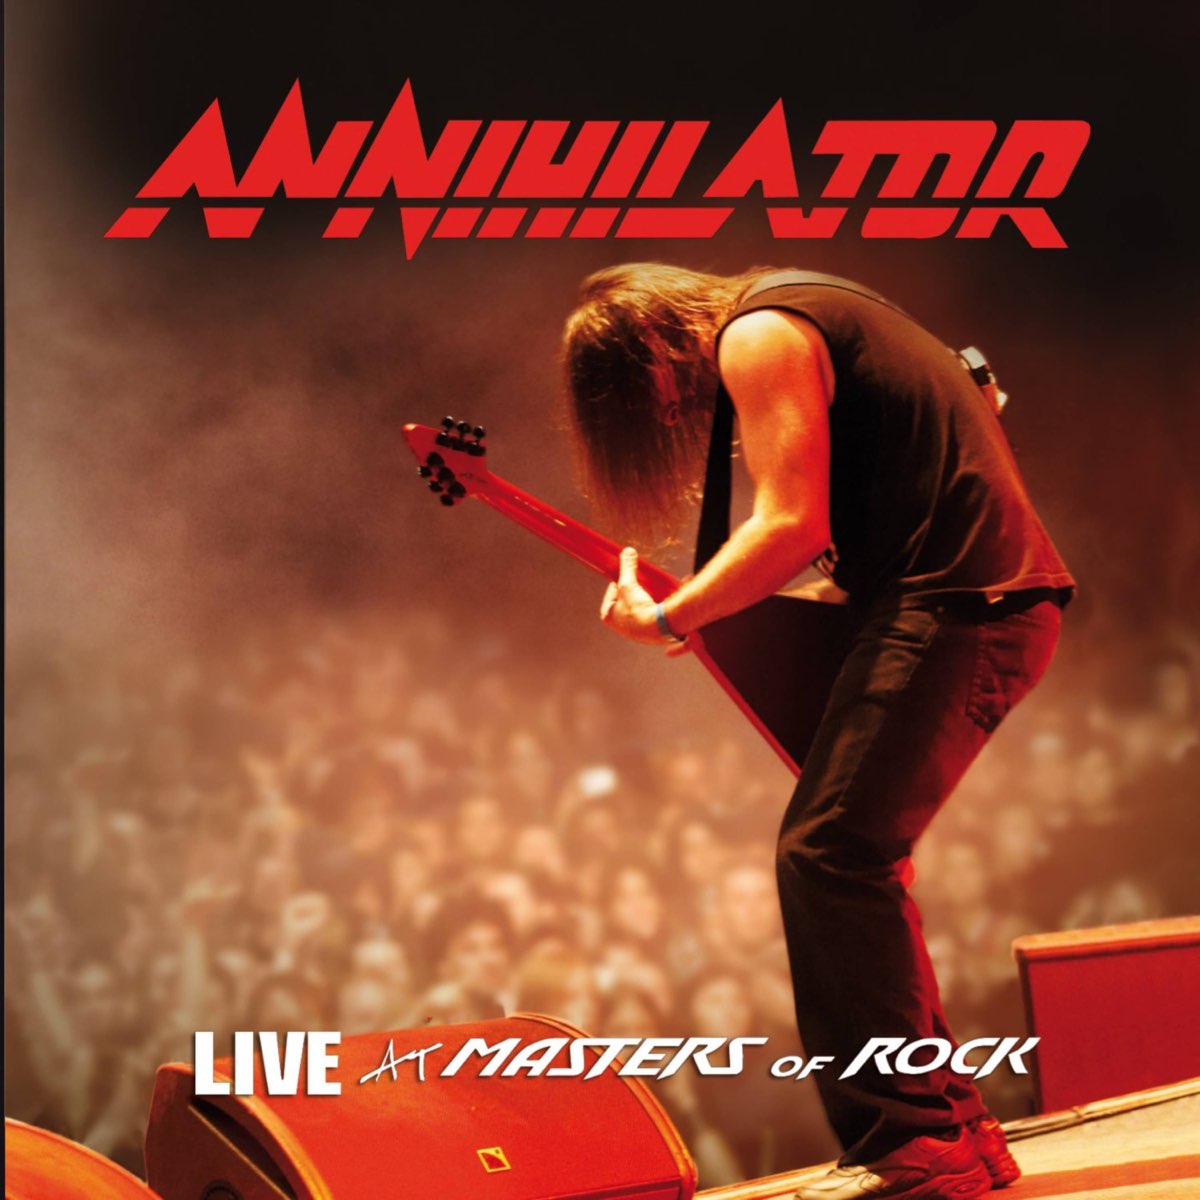 Live at Masters of Rock - Album by Annihilator - Apple Music